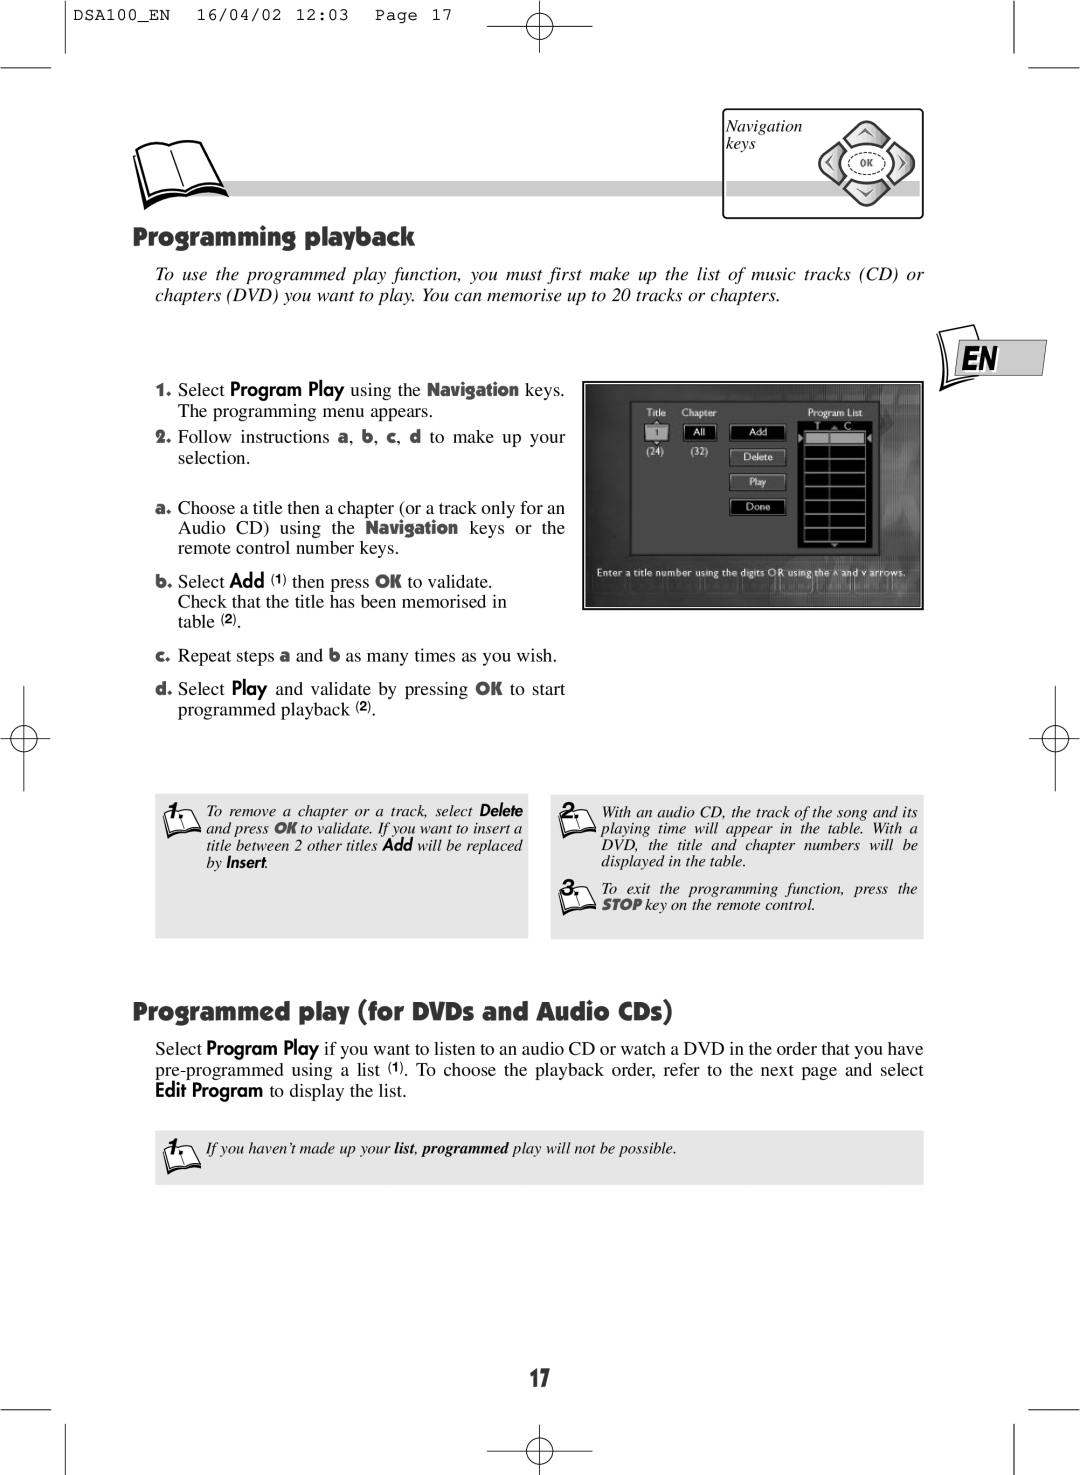 Technicolor - Thomson DSA100 warranty Programming playback, Programmed play for DVDs and Audio CDs 